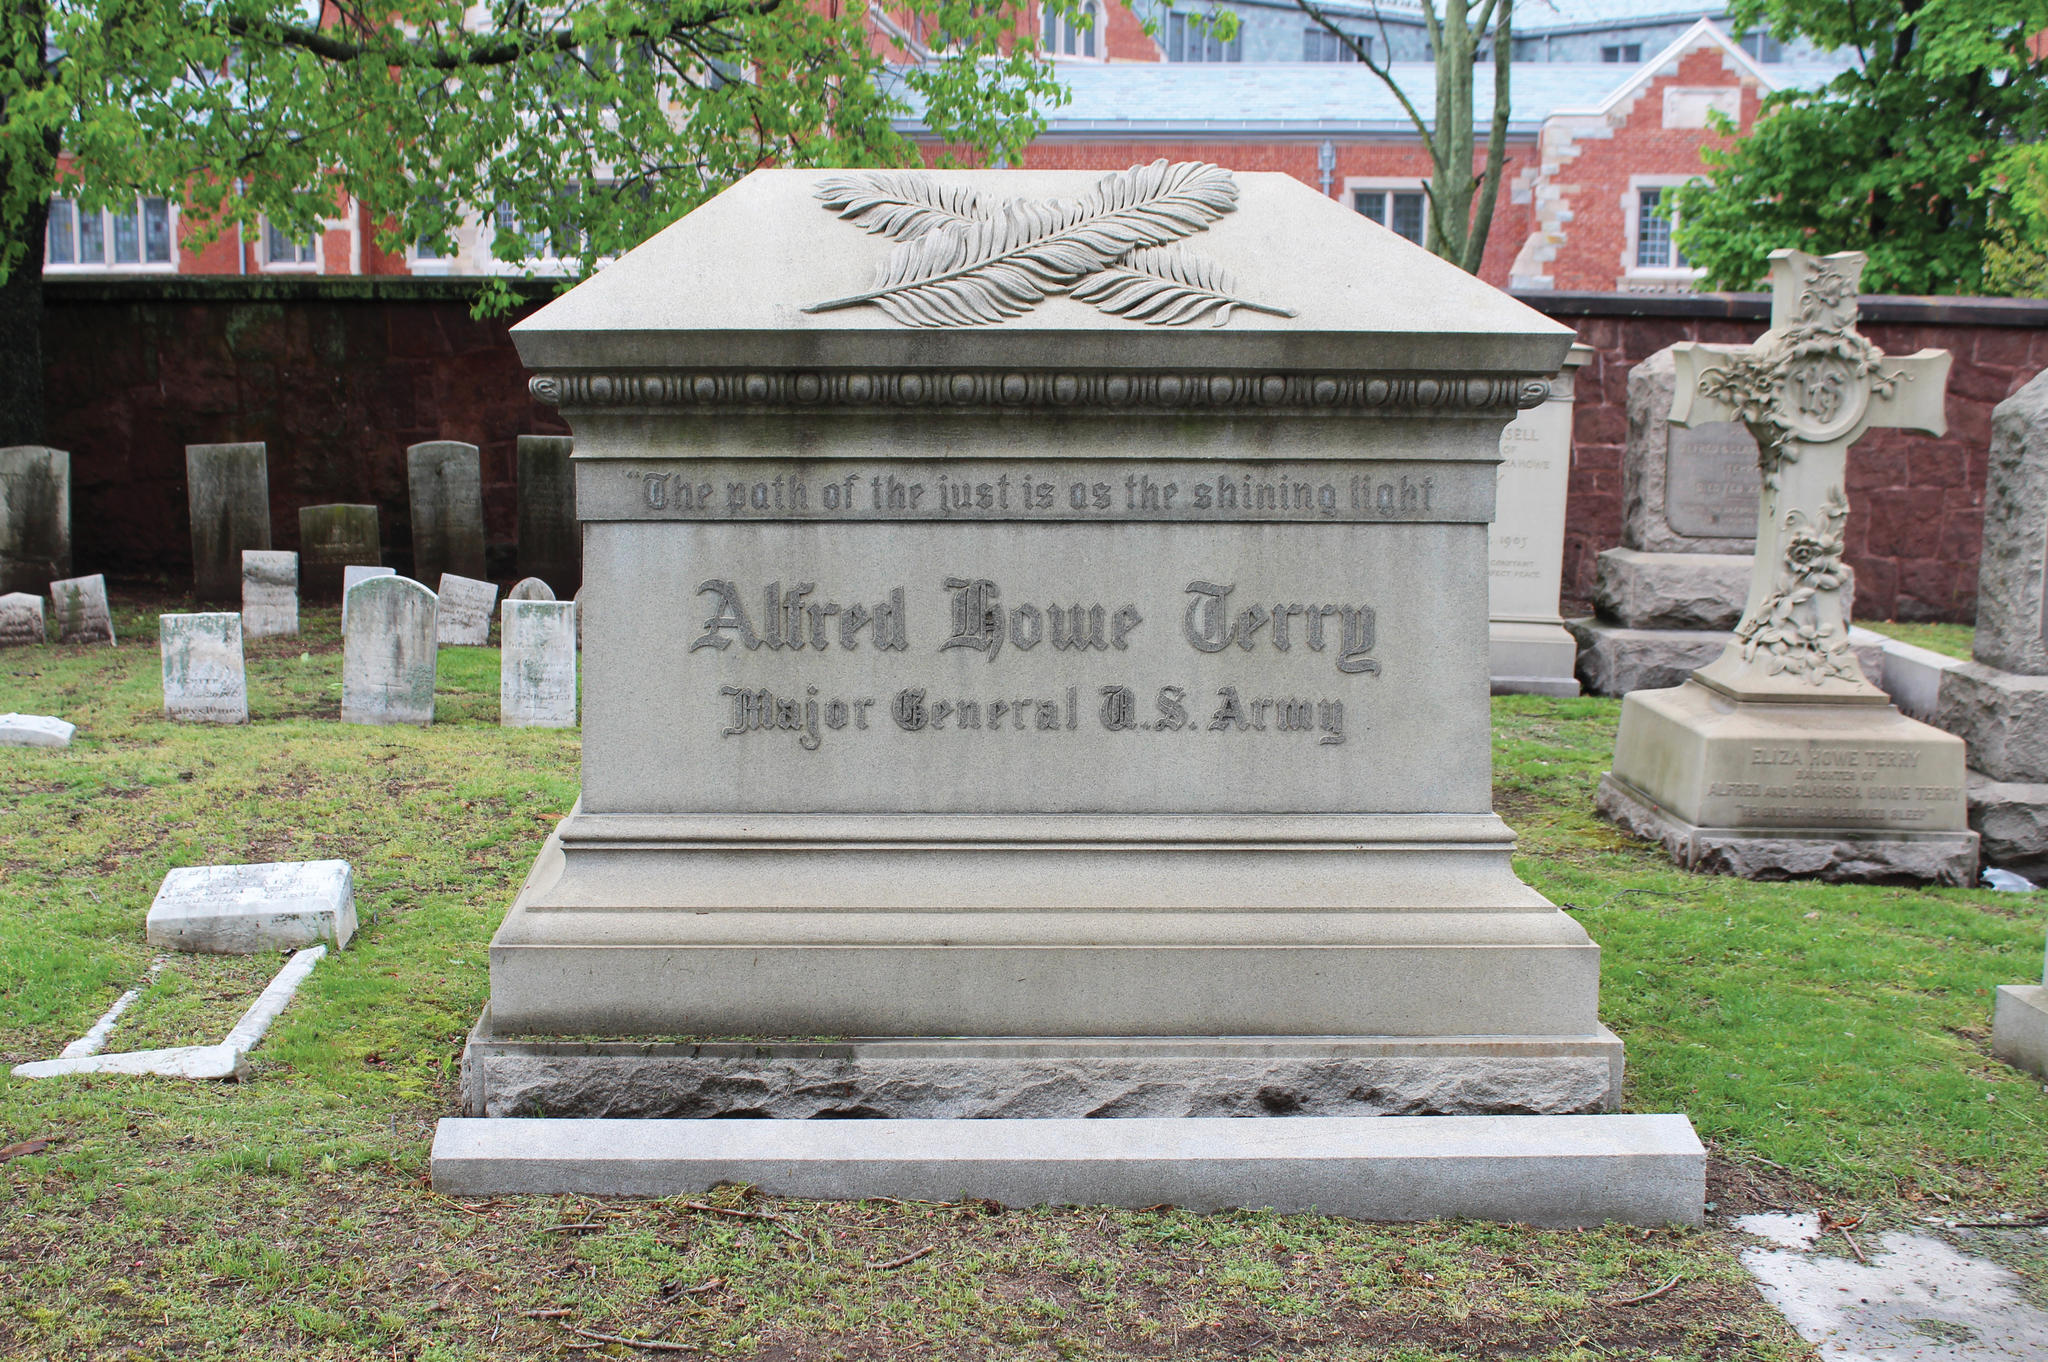 <span style="background-color:transparent">Major General in the U.S. Army. Terry is the highest ranking U.S. Army veteran in Grove Street Cemetery. A graduate of Hopkins School in New Haven, he attended Yale Law School but did not graduate. Although he had no formal military training, when the war started he raised the 2nd Connecticut Infantry Regiment and was appointed its colonel. He led his troops in the capture of Fort Fisher in North Carolina in 1865 and served in the army out west after the war.</span><span style="background-color:transparent"> </span><span><span style="background-color:transparent">Location: 21 Ivy</span></span> 